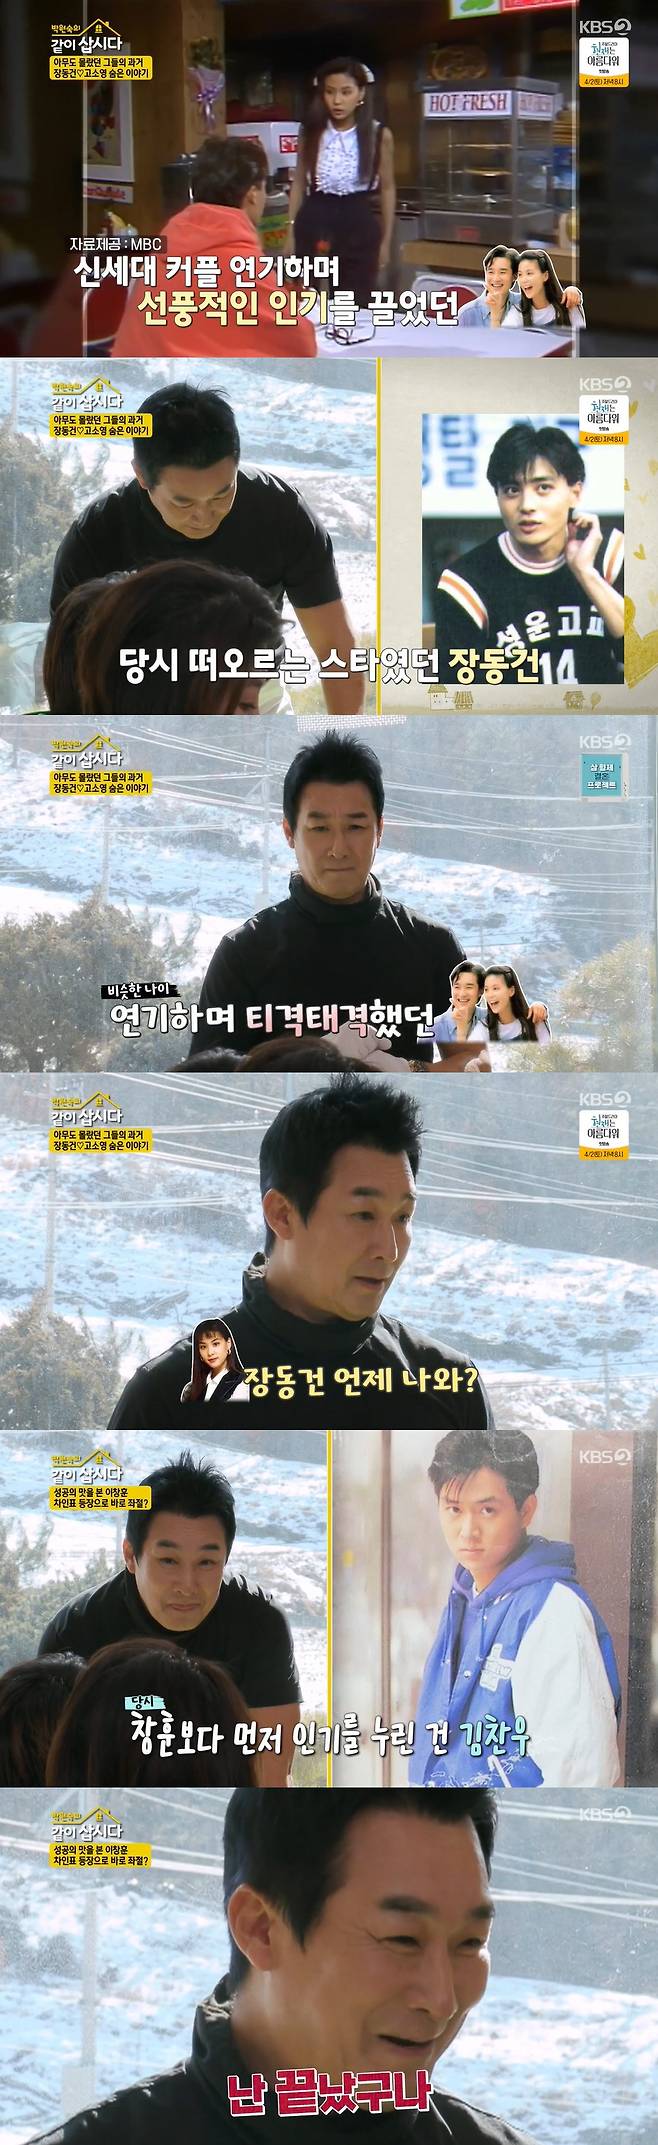 Actor Lee Chang-hoon released an episode at the time of filming Moms Sea.On the 23rd KBS 2TV Lets Live With Park Won-sook Season 3, the story of Lee Chang-hoon, who visited the oblique after last week, was revealed.Lee Chang-hoon said he gained up to 94kg after marriage, but managed to lose 16kg in 16 weeks.I was born in the world and did my best, he said.Lee Chang-hoon, who says that the reason for the steady exercise after the diet success is because of her daughter, said, My daughter has become one of this year.My daughters friends, Fathers, are all in their 30s, and I am in my 50s.  What if my daughter is teased as your father grandfather? I was worried about it. On the day, Lee Chang-hoon also released an episode related to the ambassadors mistake: I still remember my first ambassador when I made my debut, he said, I practiced while starving rice.But the first time I appeared, I was so nervous that I finally got NG. I practiced for three hours and I thought I should quit the actor. Lee Chang-hoon, who later made a similar mistake when he appeared in The Power Diary, said, I acted with Choi Bum-am.I kept NG, and Choi said, Where are you from? I had 12 NGs and sat down.I will quit the actor, and I think it is the last, so it was so good. However, he made a mistake of cutting off the ambassador of Choi Bum-am at the moment of his heartfelt moment. He said, Kim Soo-mi, who watched from the side, said, I cut the ambassador without courtesy. So I did it three times. From then on, I hated Kim Soo-mi, Choi Bul-am. Lee Chang-hoon said, The first script reading by actors and staff was the most scary. When I become a star, I make a lot of mini-series.Before the trembling, the drama was over, so all I did was shake. When I read a lot of drama, I was trembling again. So I took the first daily drama, The River of Mojeong. It was only a year and two months, and I felt that this was acting. Lee Chang-hoon released a behind-the-scenes story at the time of filming the popular drama Moms Sea.I was actually going to star only until the sixth episode, when Jang Dong-gun was going well, he said, who became popular with Ko So-young and a new generation couple in the drama.But by the time I was six times older, I was more popular than Jang Dong-gun, with the top ranking being Ko So-young and Lee Chang-hoon.So I was the first Ko So-young man to marriage me, he said, boasting the popularity that was high enough to change the contents of the drama.Lee Chang-hoon also said, I was fighting so when I was acting, Confessions that I was not good with Ko So-young at the time of shooting.But when Ko So-young fights, he always says, When is Jang Dong-gun coming out?From then on, I looked for Jang Dong-gun and eventually marriage. Lee Chang-hoon, who had been the most popular in about five years after his debut, said, Kim Chan-woo was popular then.Kim Chan-woo was the number one hit player for two and a half years, so I wanted to be more popular, too, with huge commercials and lots of money.But after a year and a half, I got a ticket. So I wanted to be over.